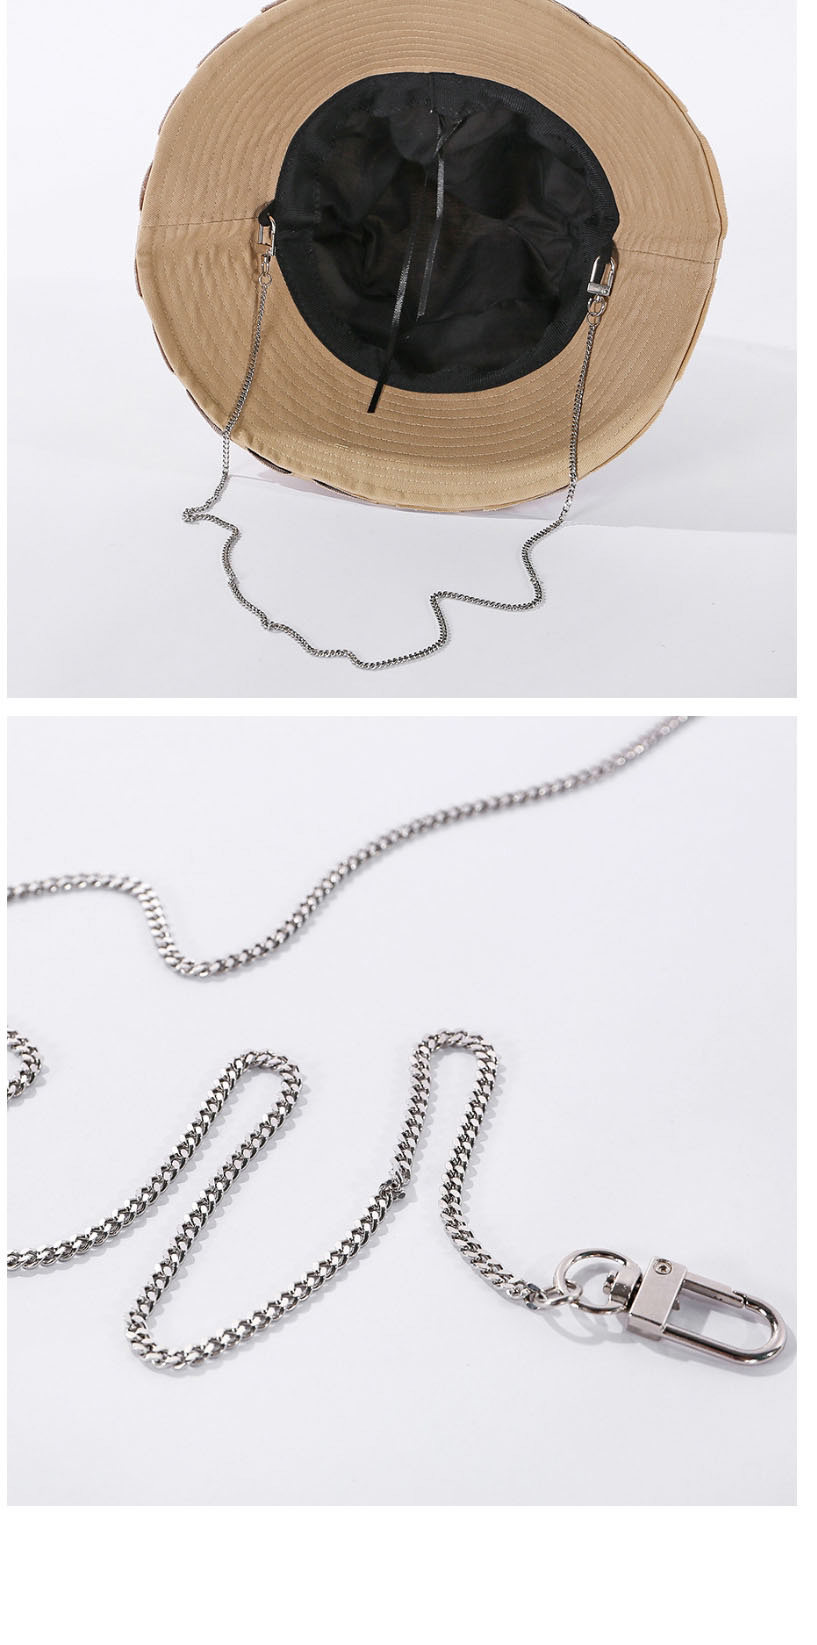 Fashion White Smiley Embroidered Wide-brimmed Chain Fisherman Hat,Sun Hats